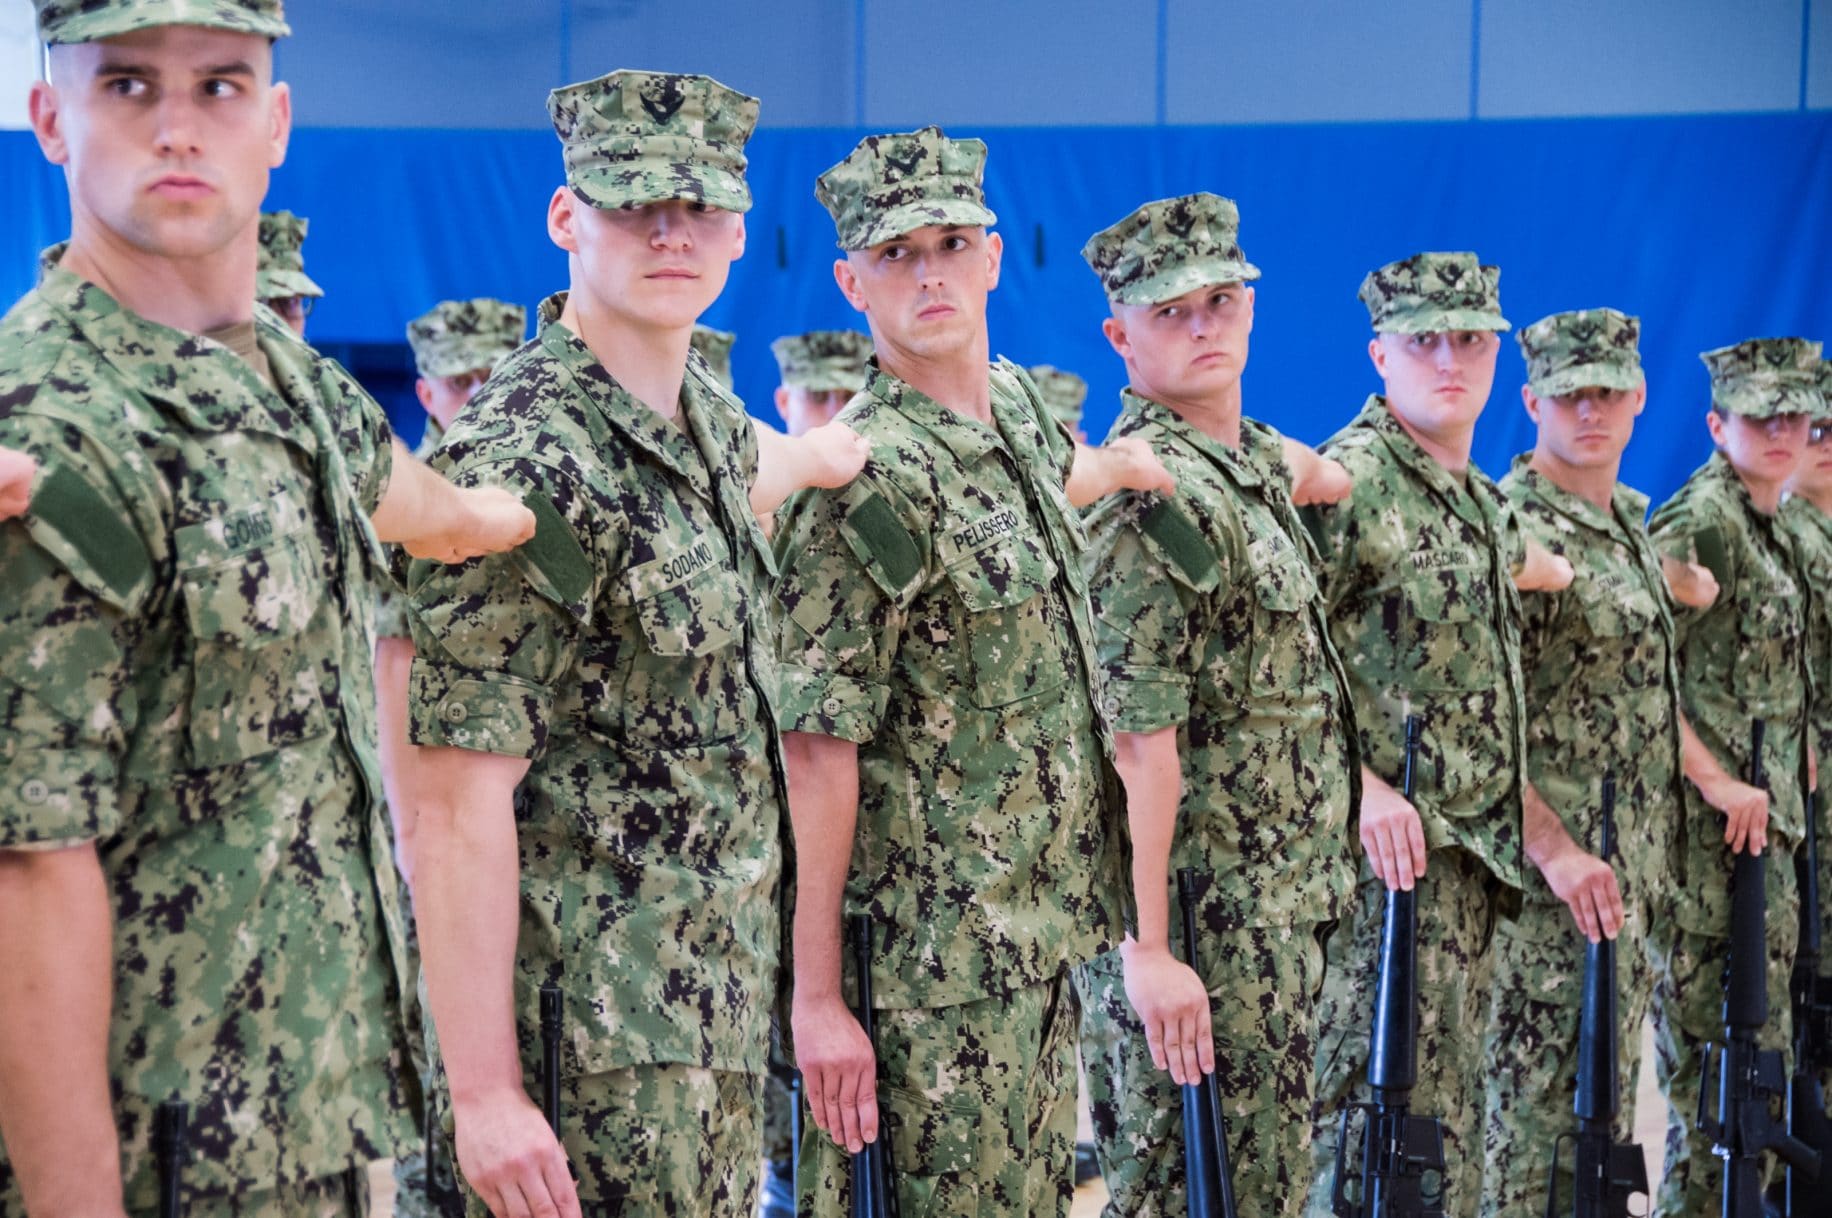 US Navy ends its 'blueberry' camouflage uniforms | American Military News